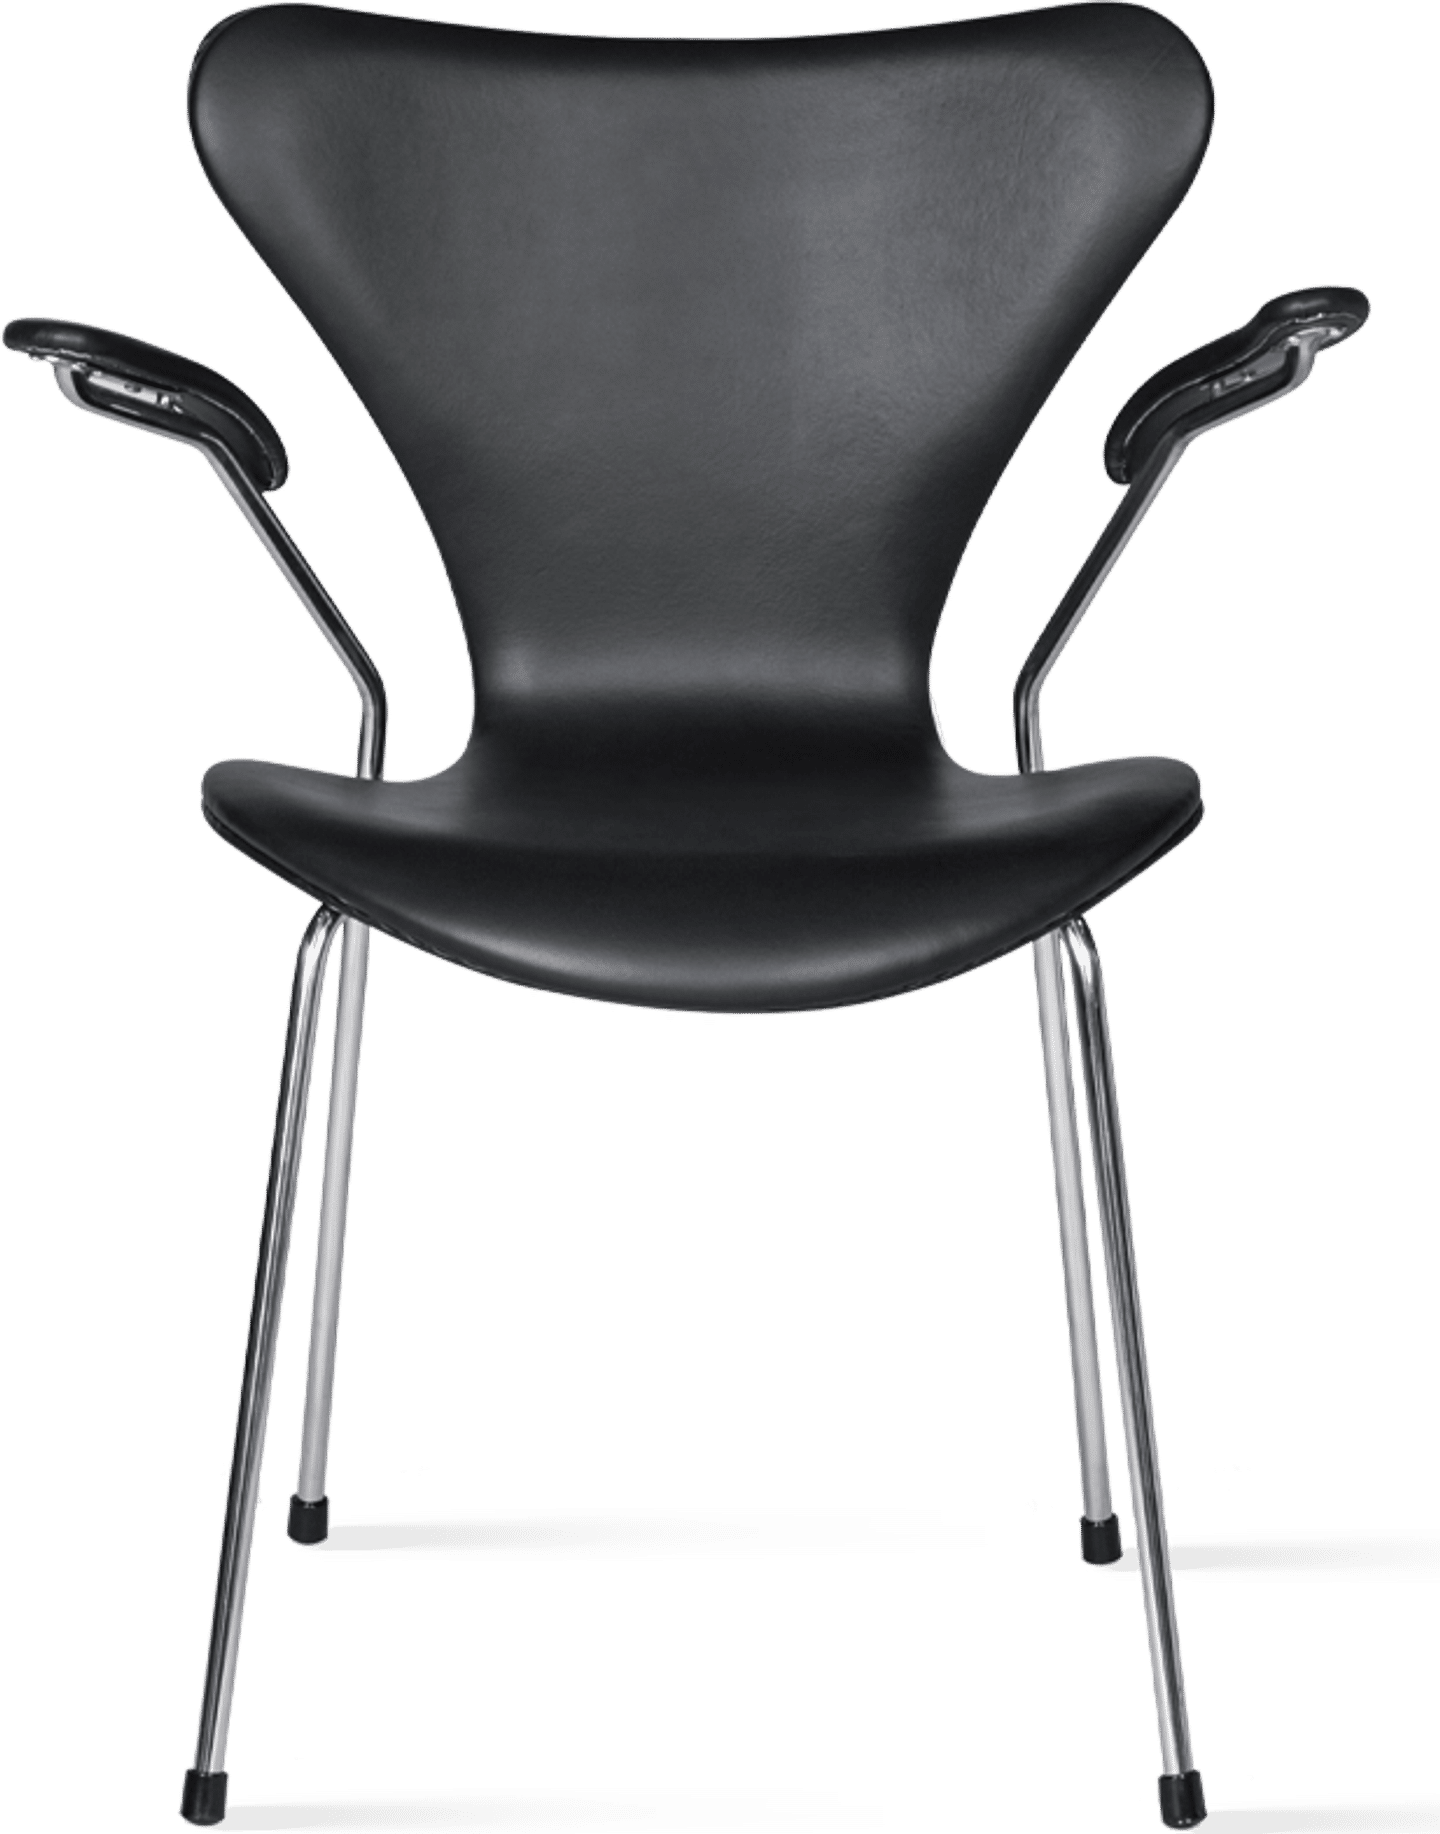 Series 7 Chair Carver - Full Leather Black image.